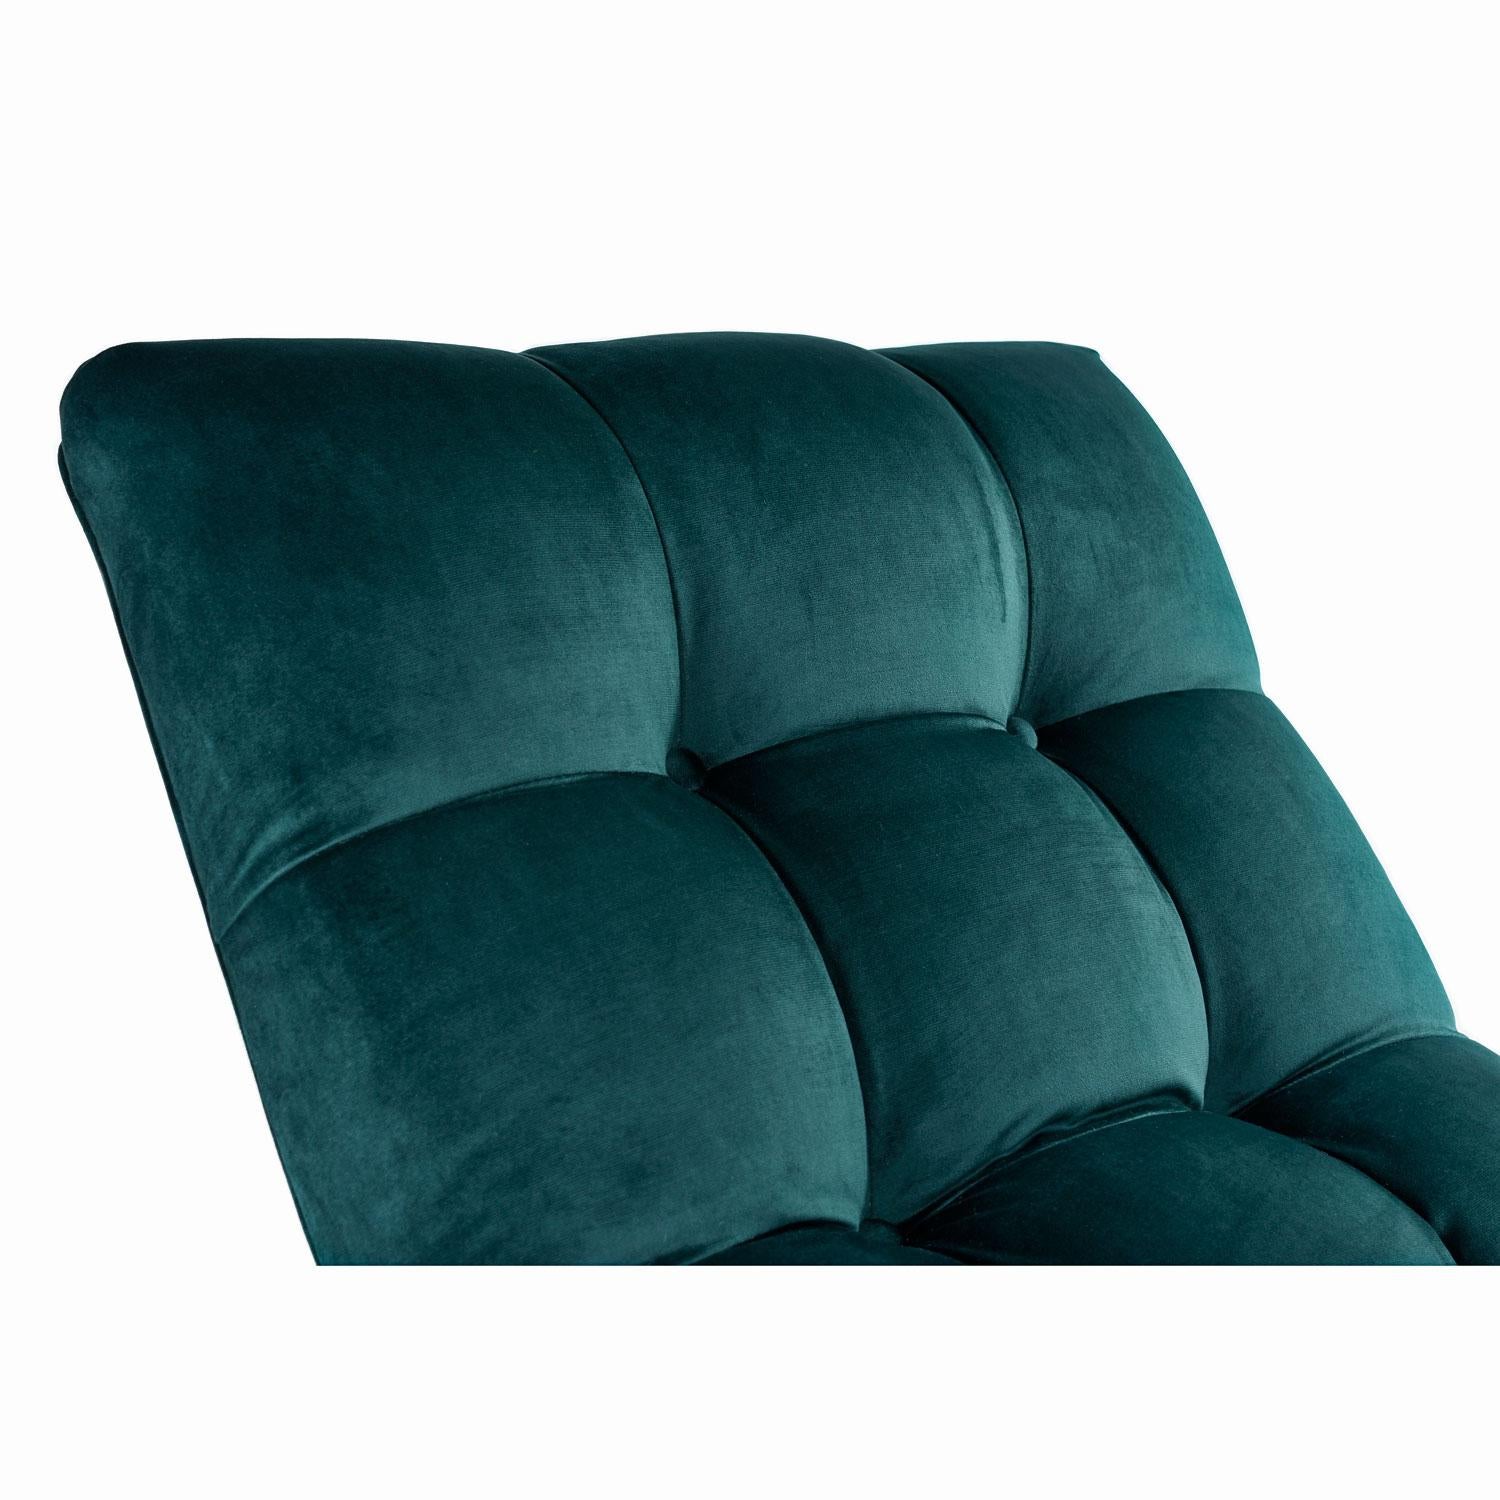 turquoise chaise lounge chair